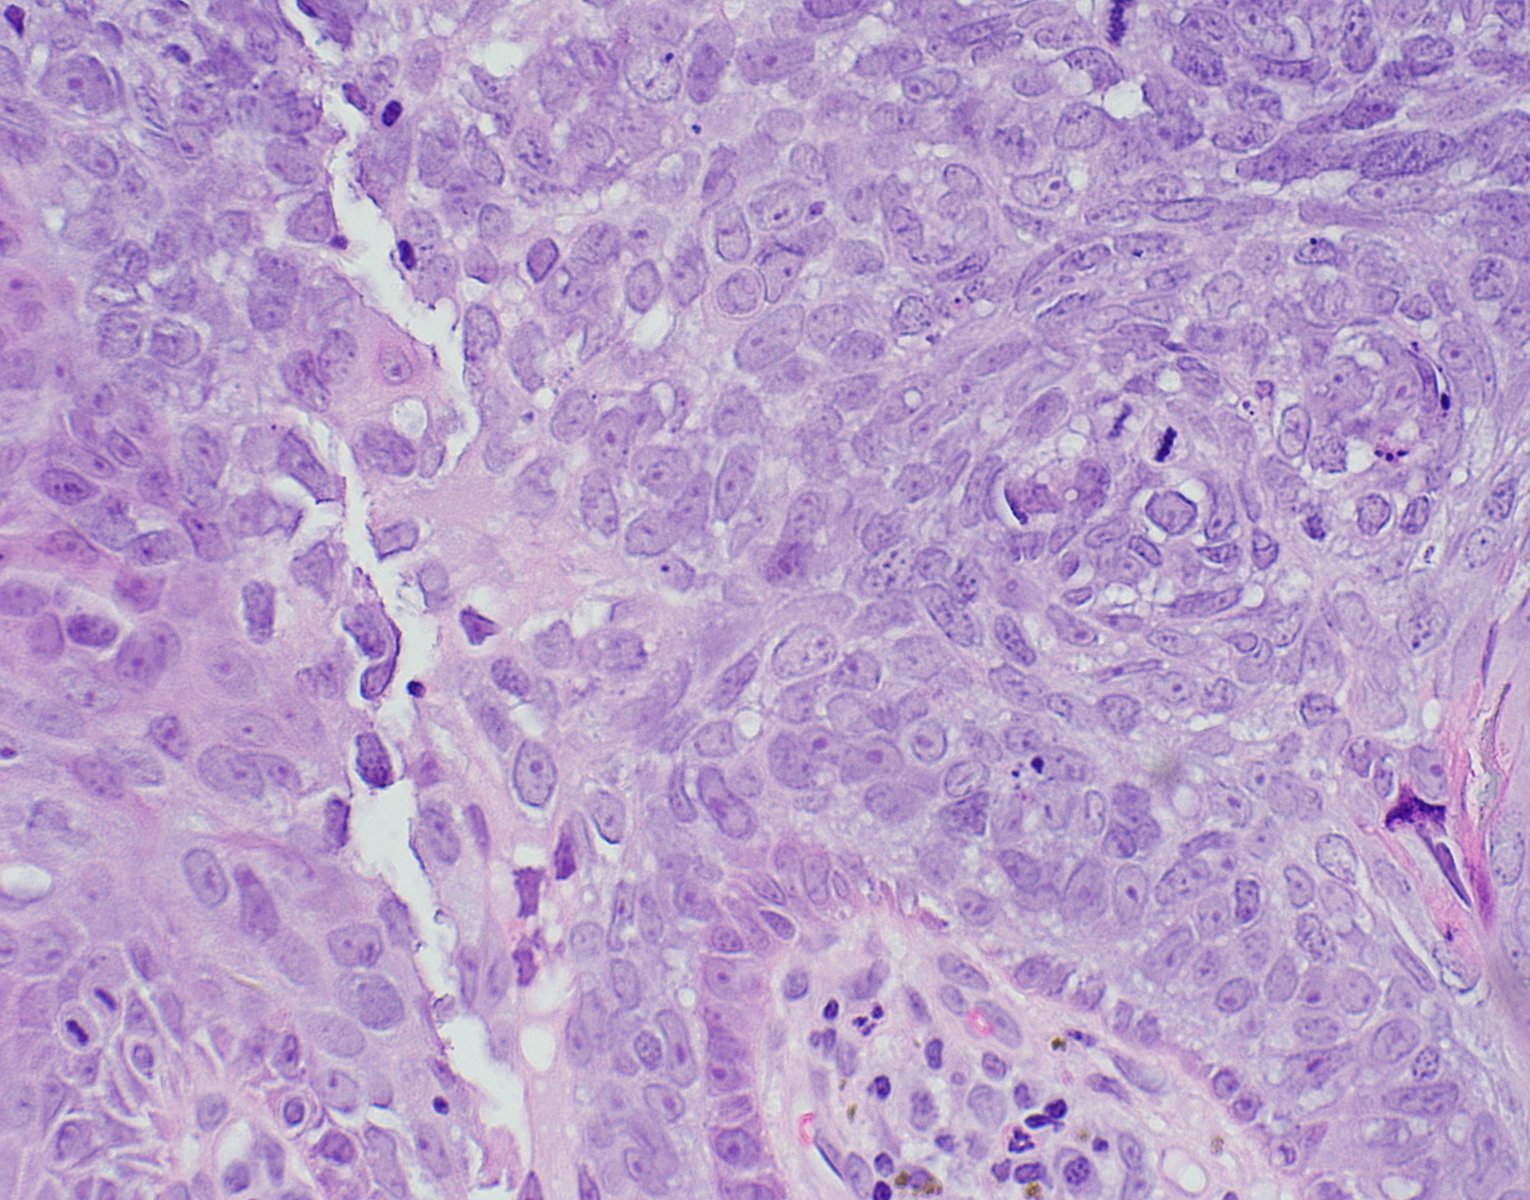 Atypical basaloid cells within the epidermis